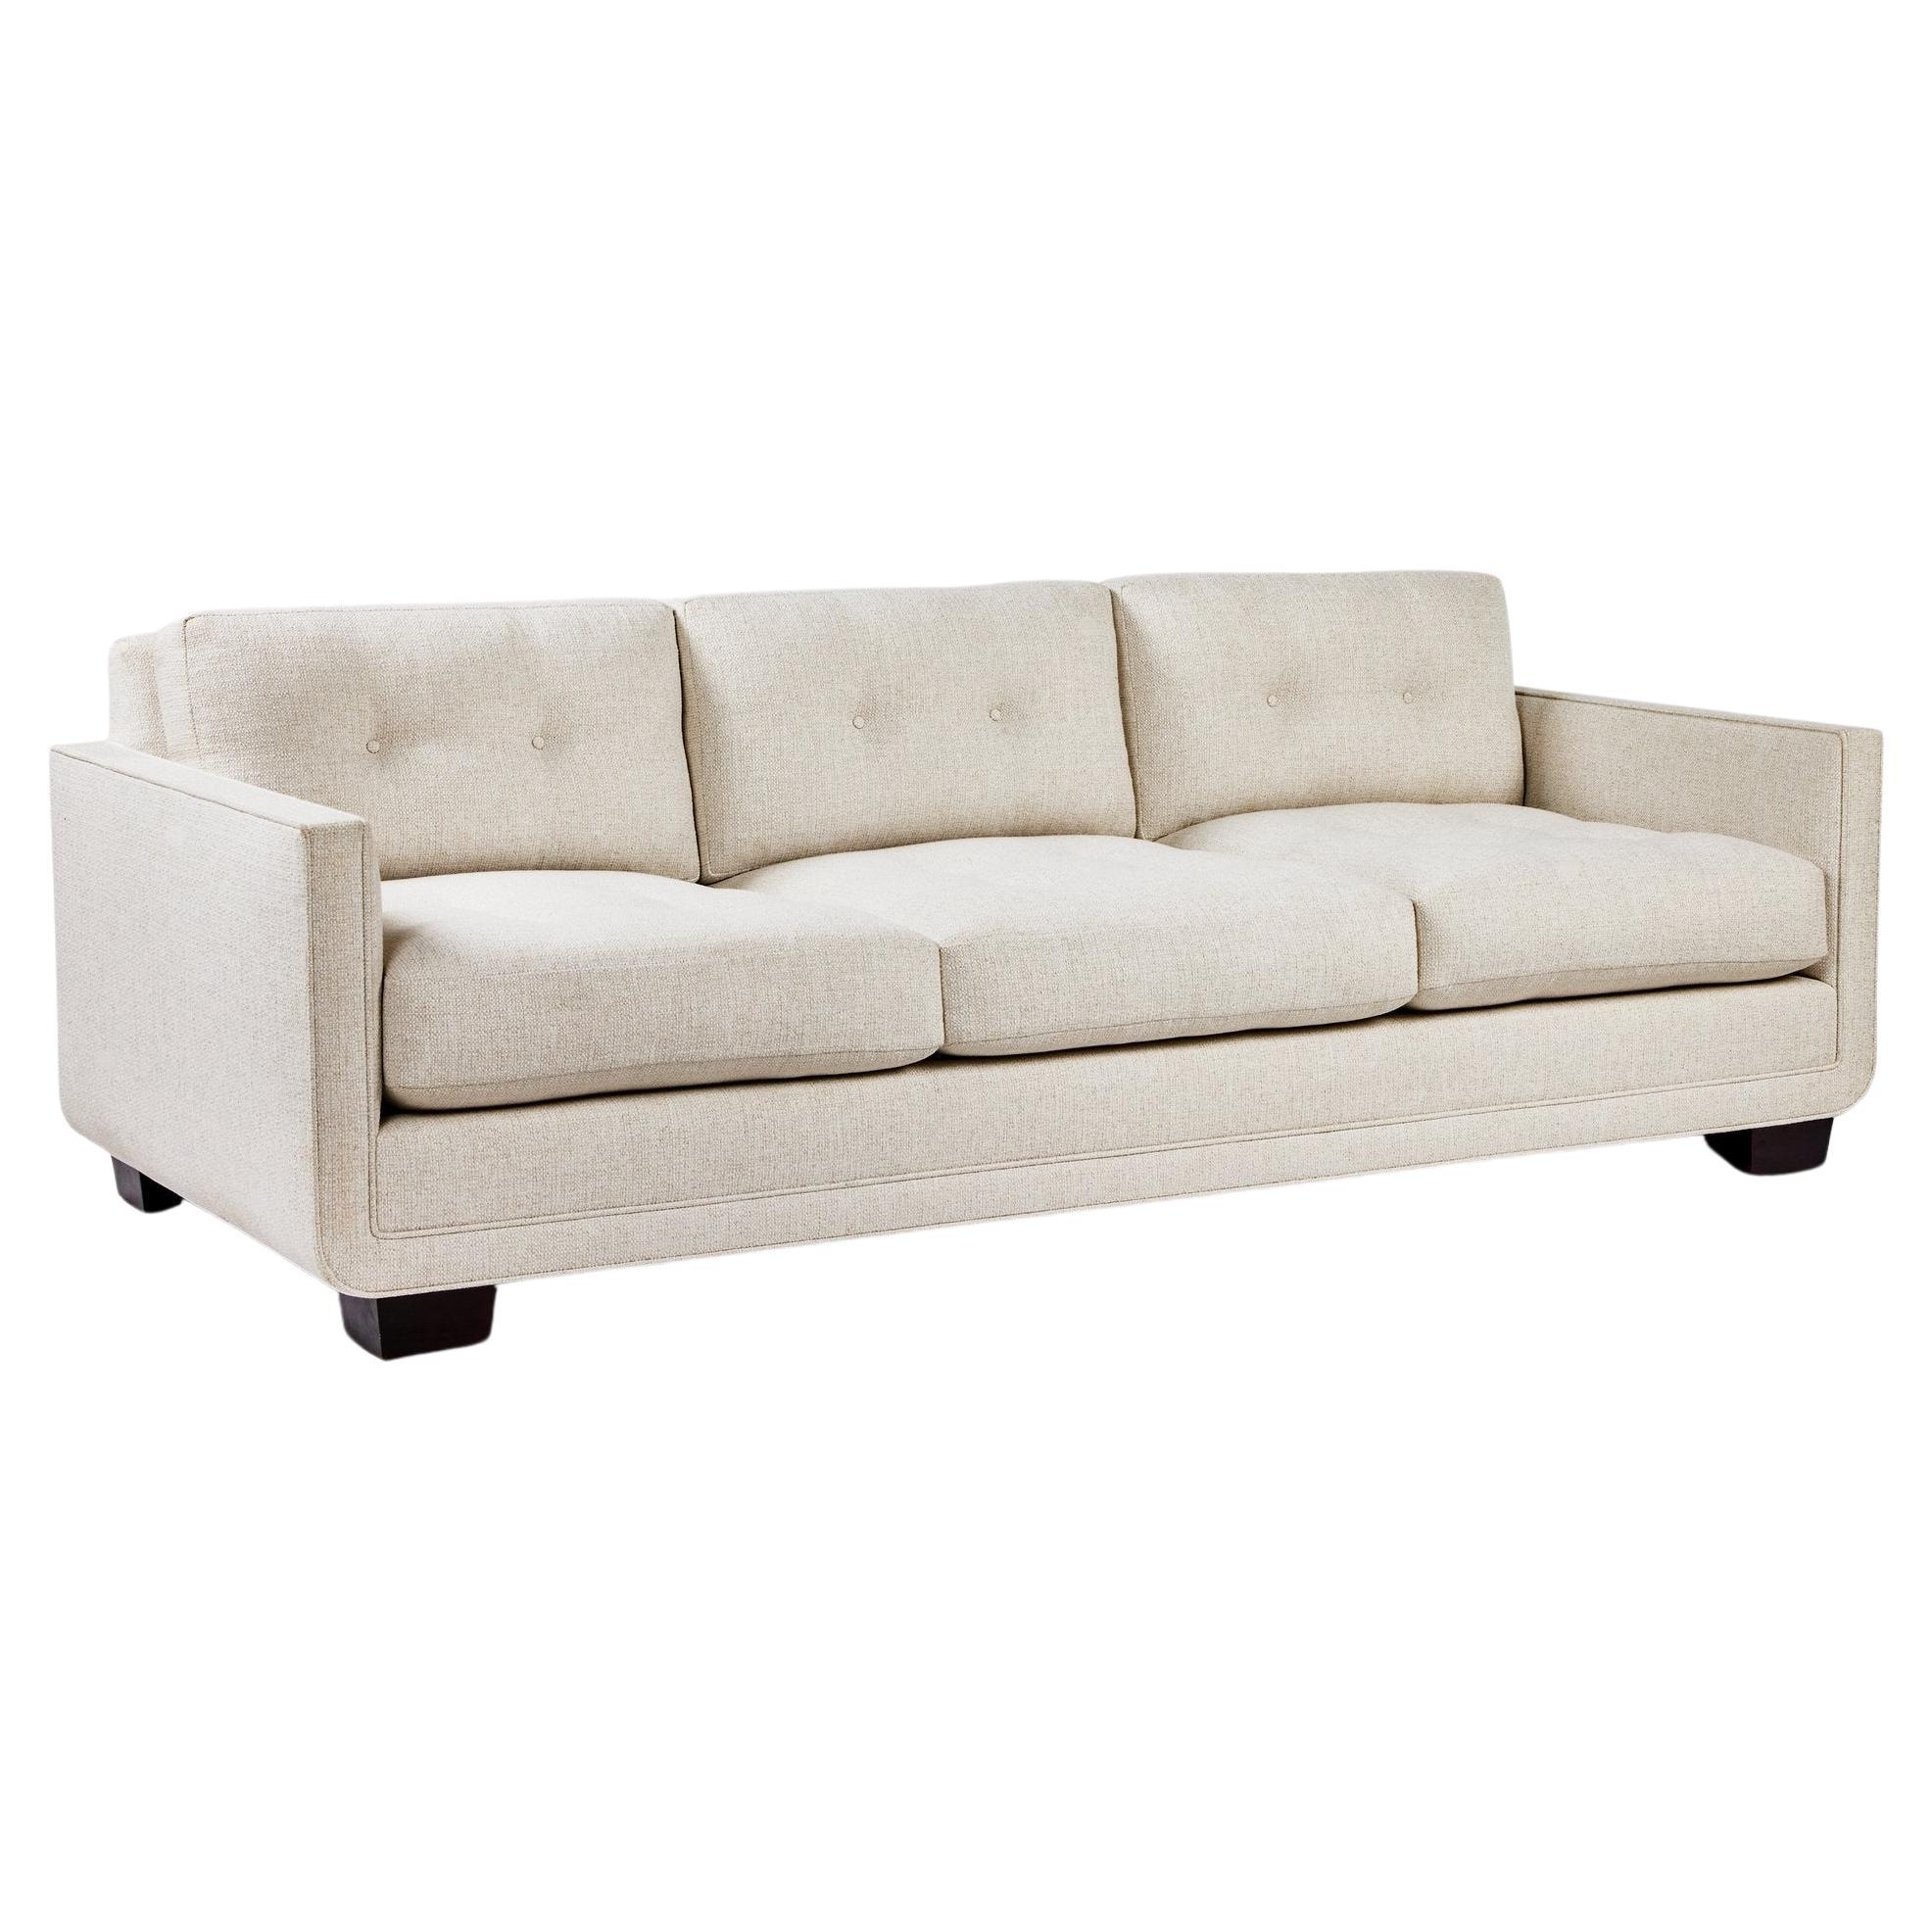 Modern Streamlined Tufted Sofa with Curved Frame Detail by Martin & Brockett For Sale